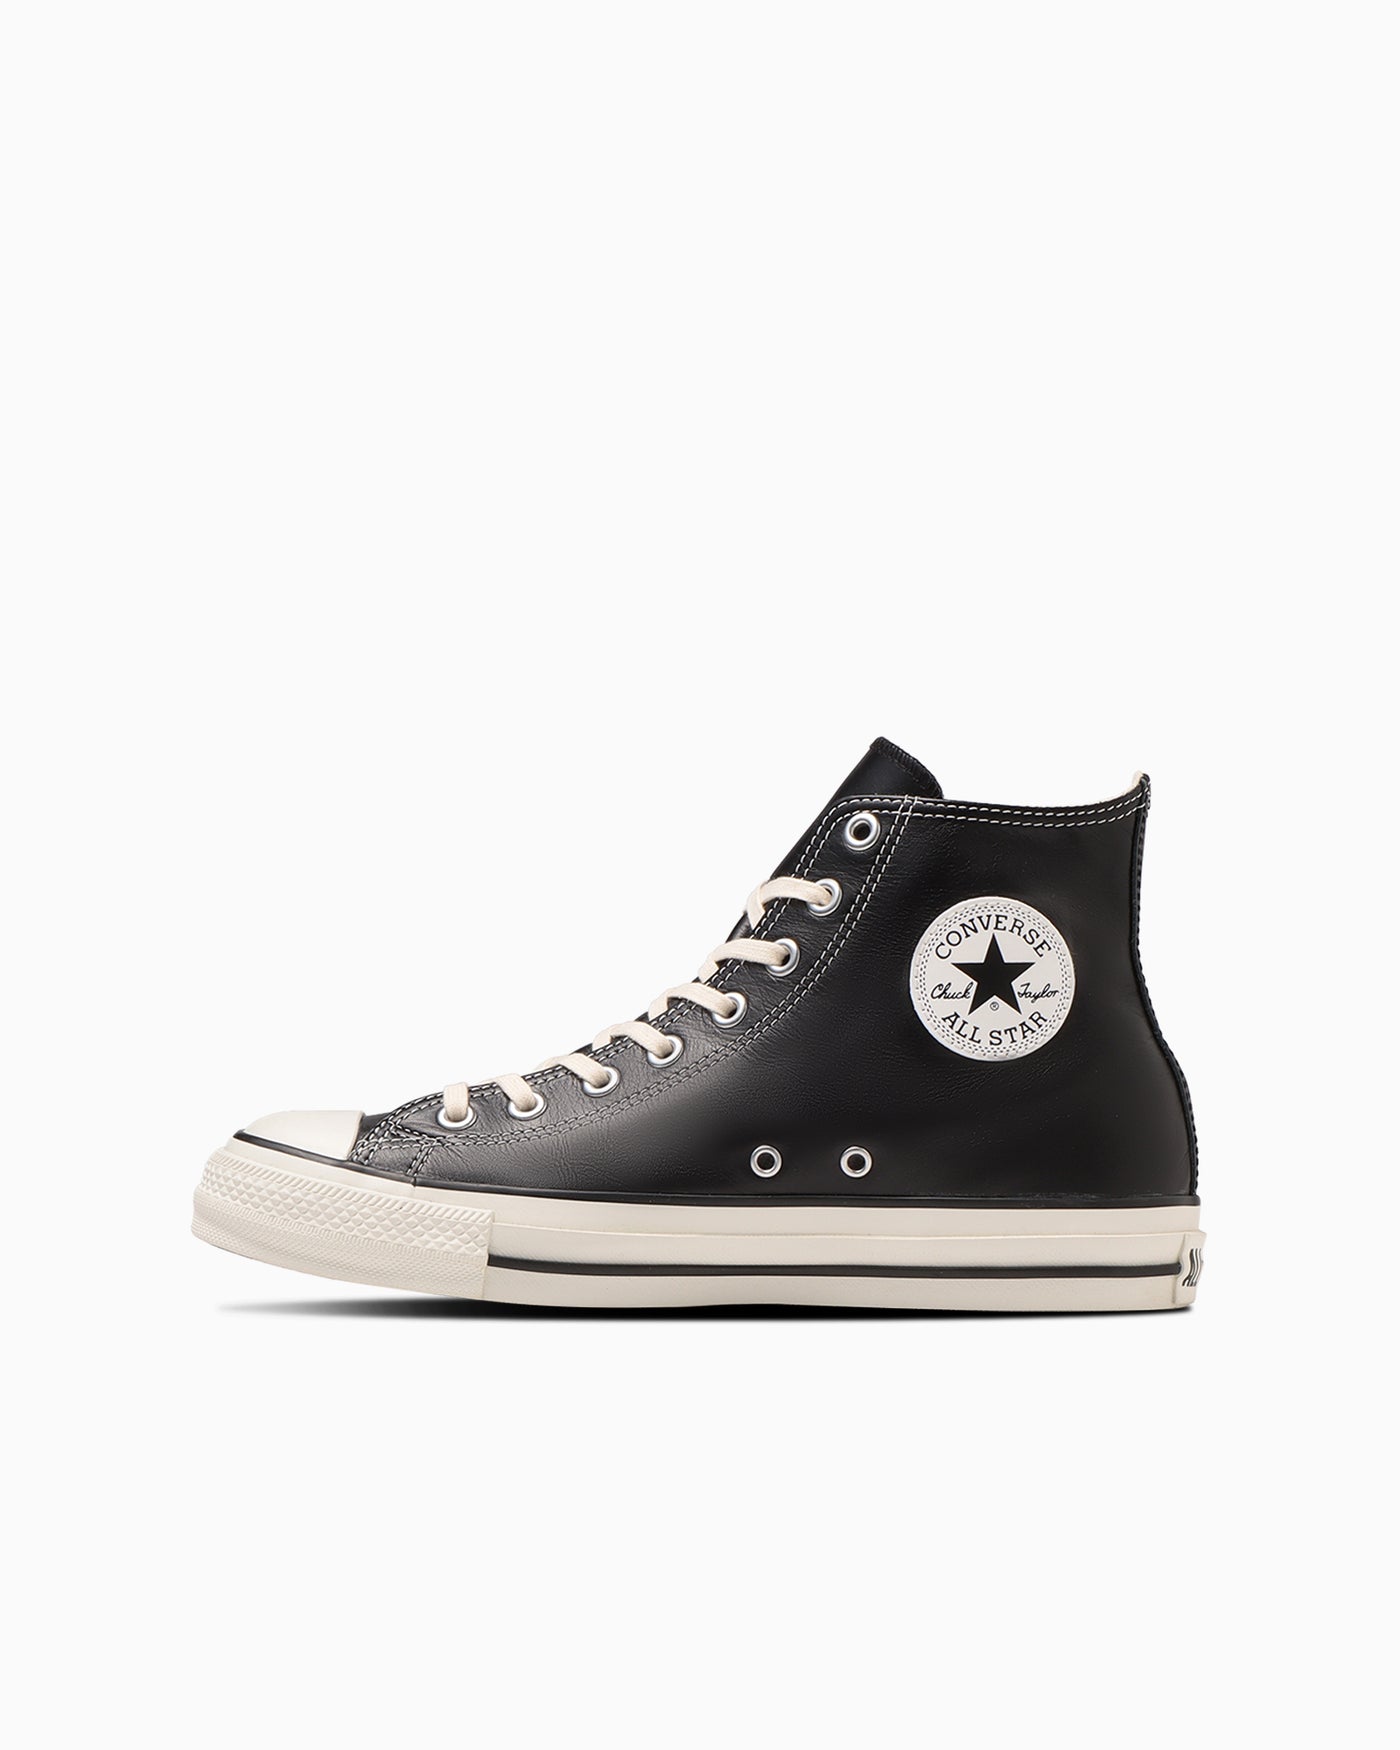 CONVERSE ALL STAR OLIVE GREEN LEATHER HI